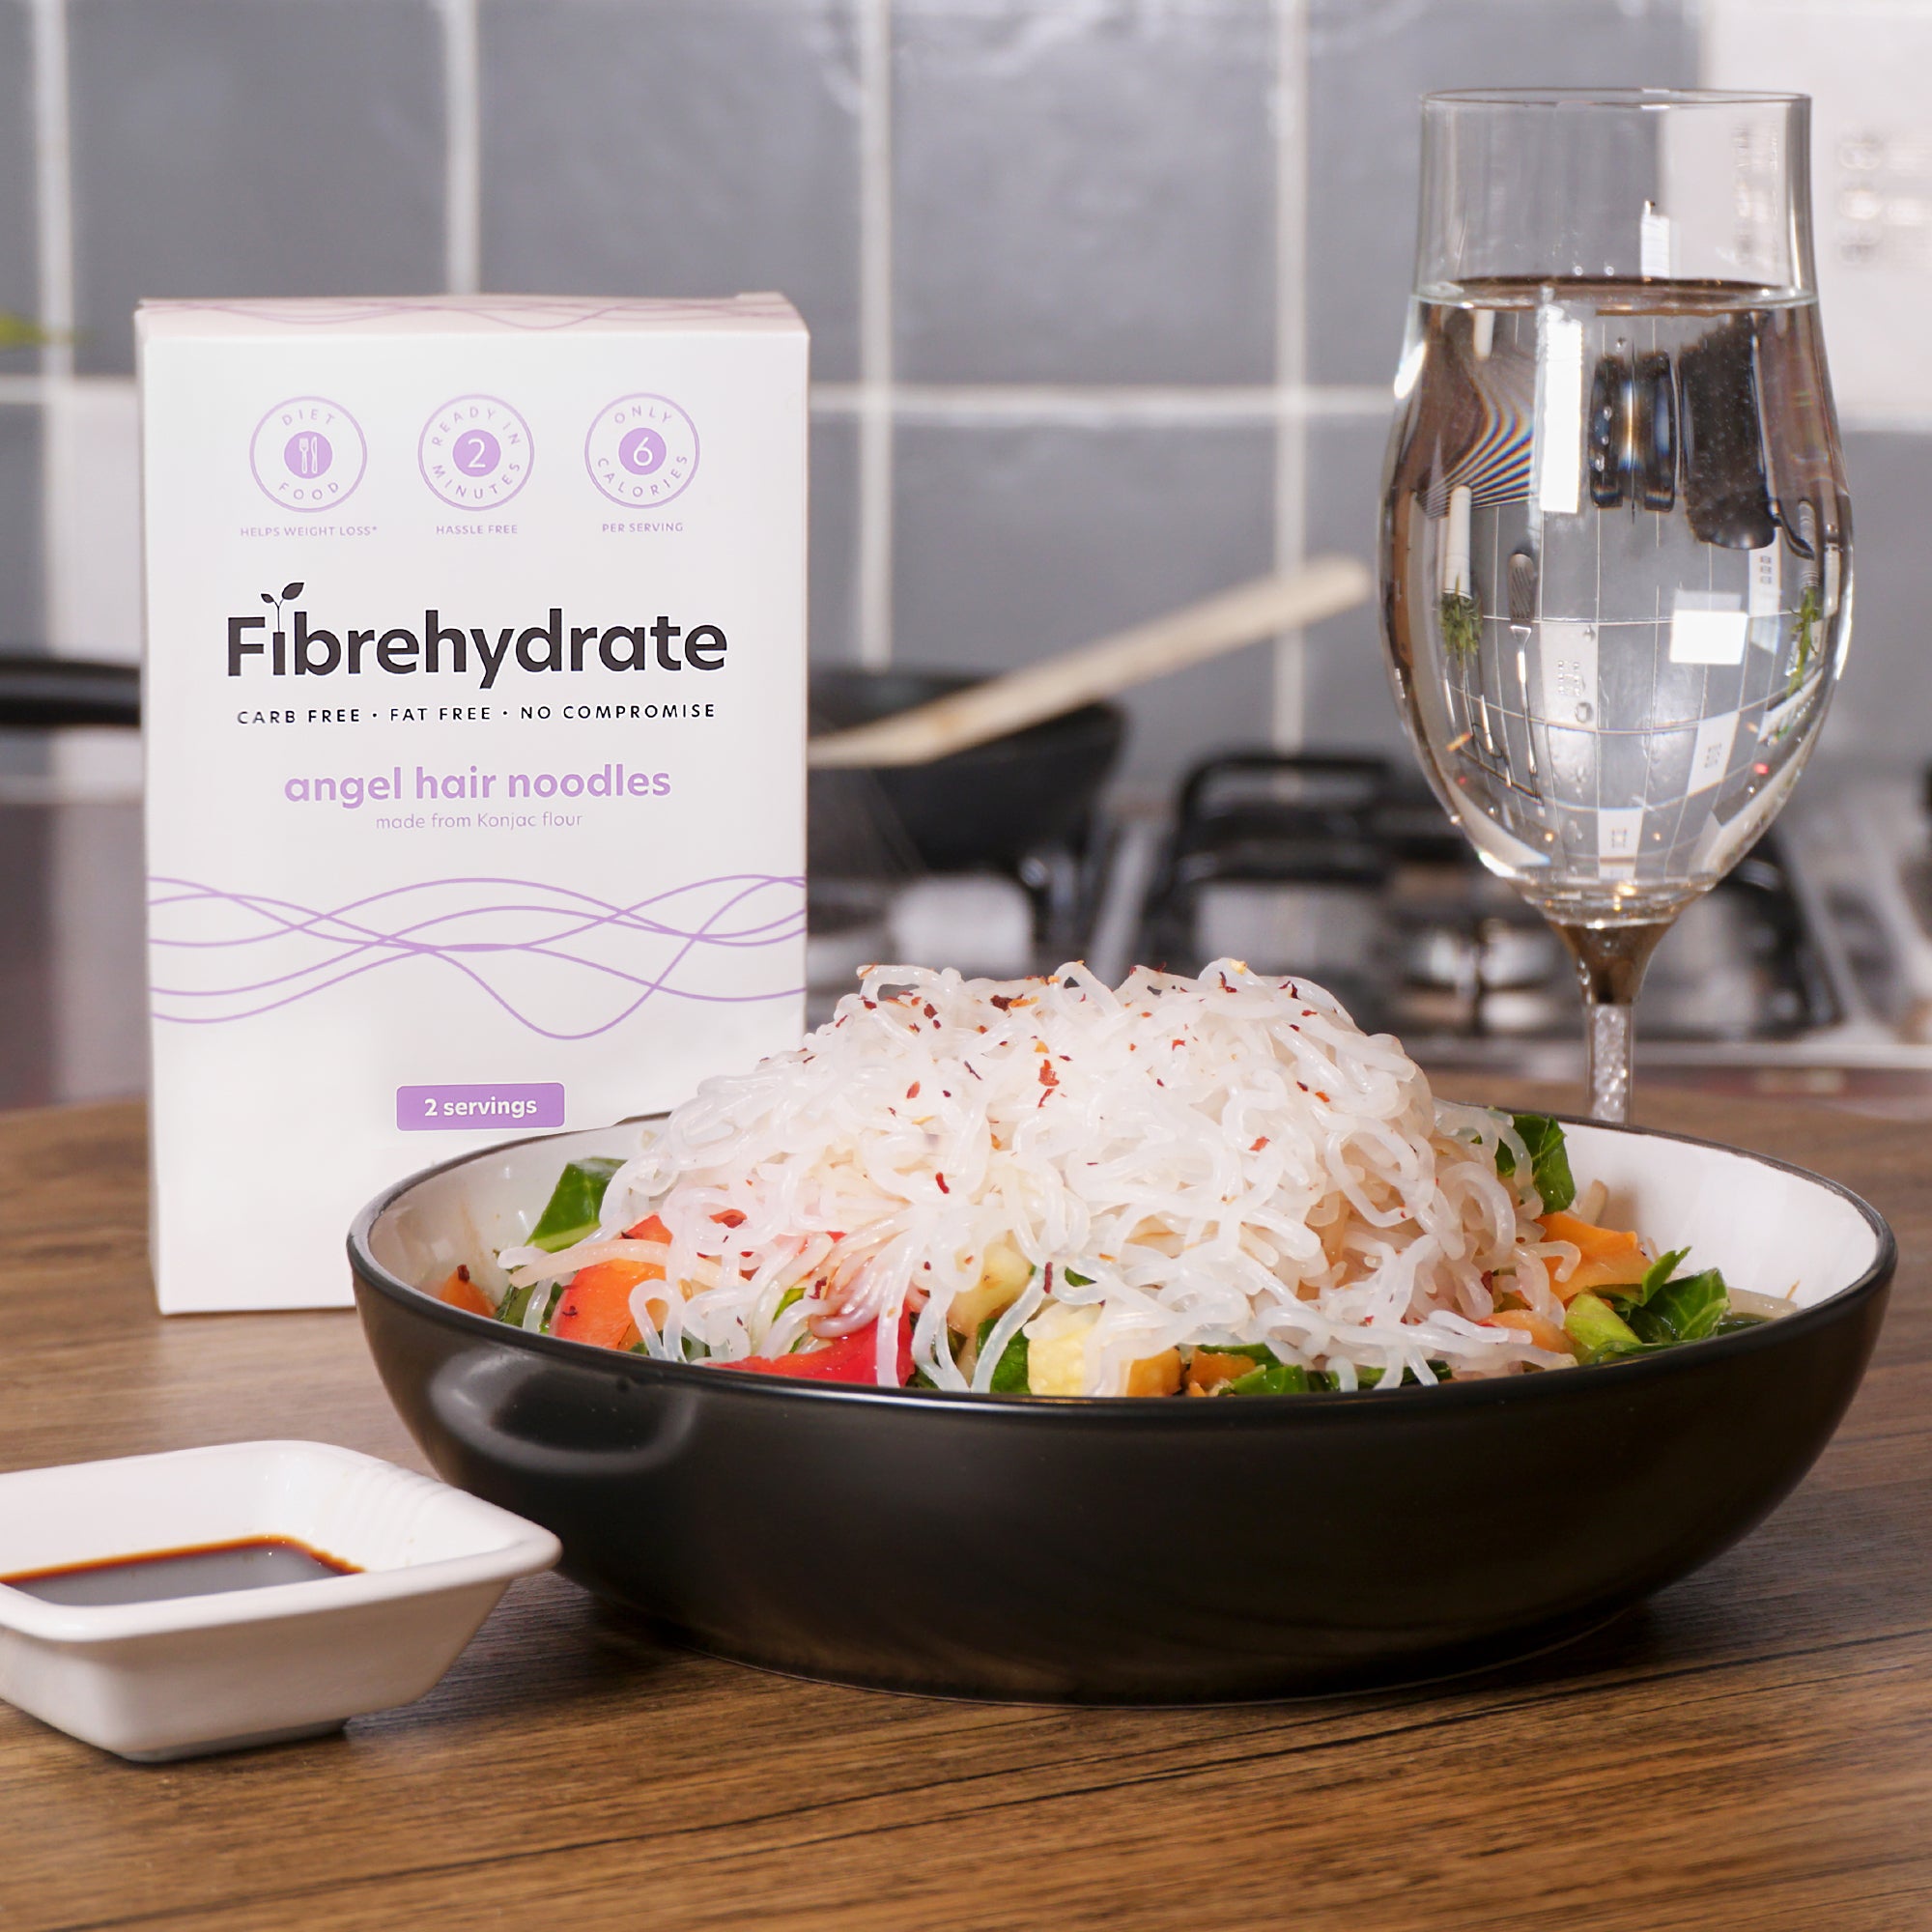 30 for 10 – Fibrehydrate Limited Time Offer